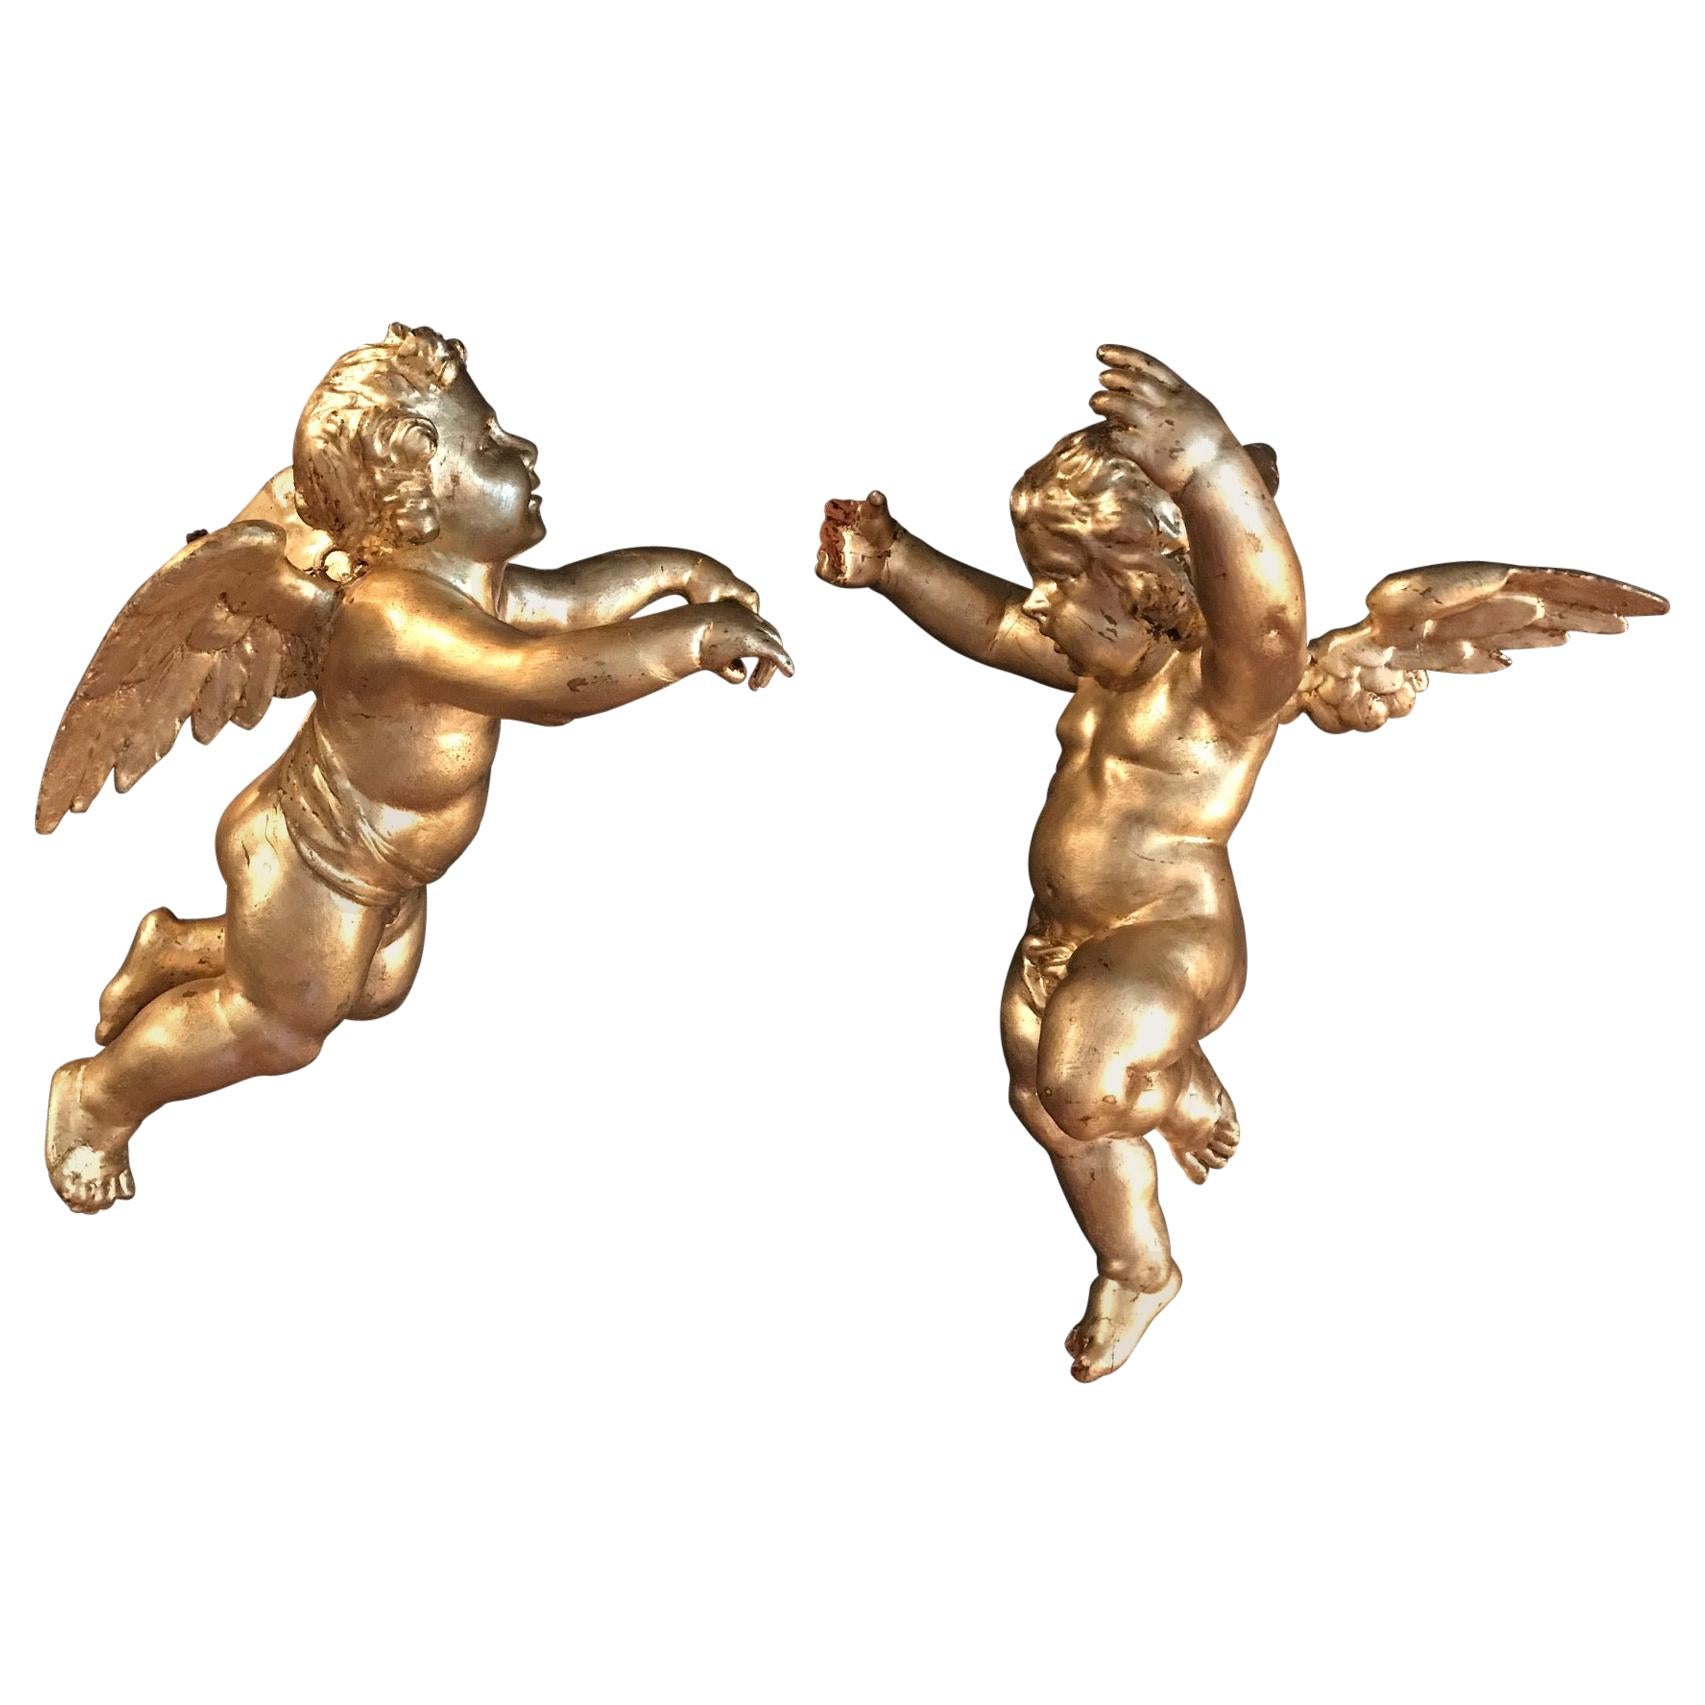 Antique Pair of Hanging Italian Hand Carved Wood Gilded Putti, Cherub, Angels